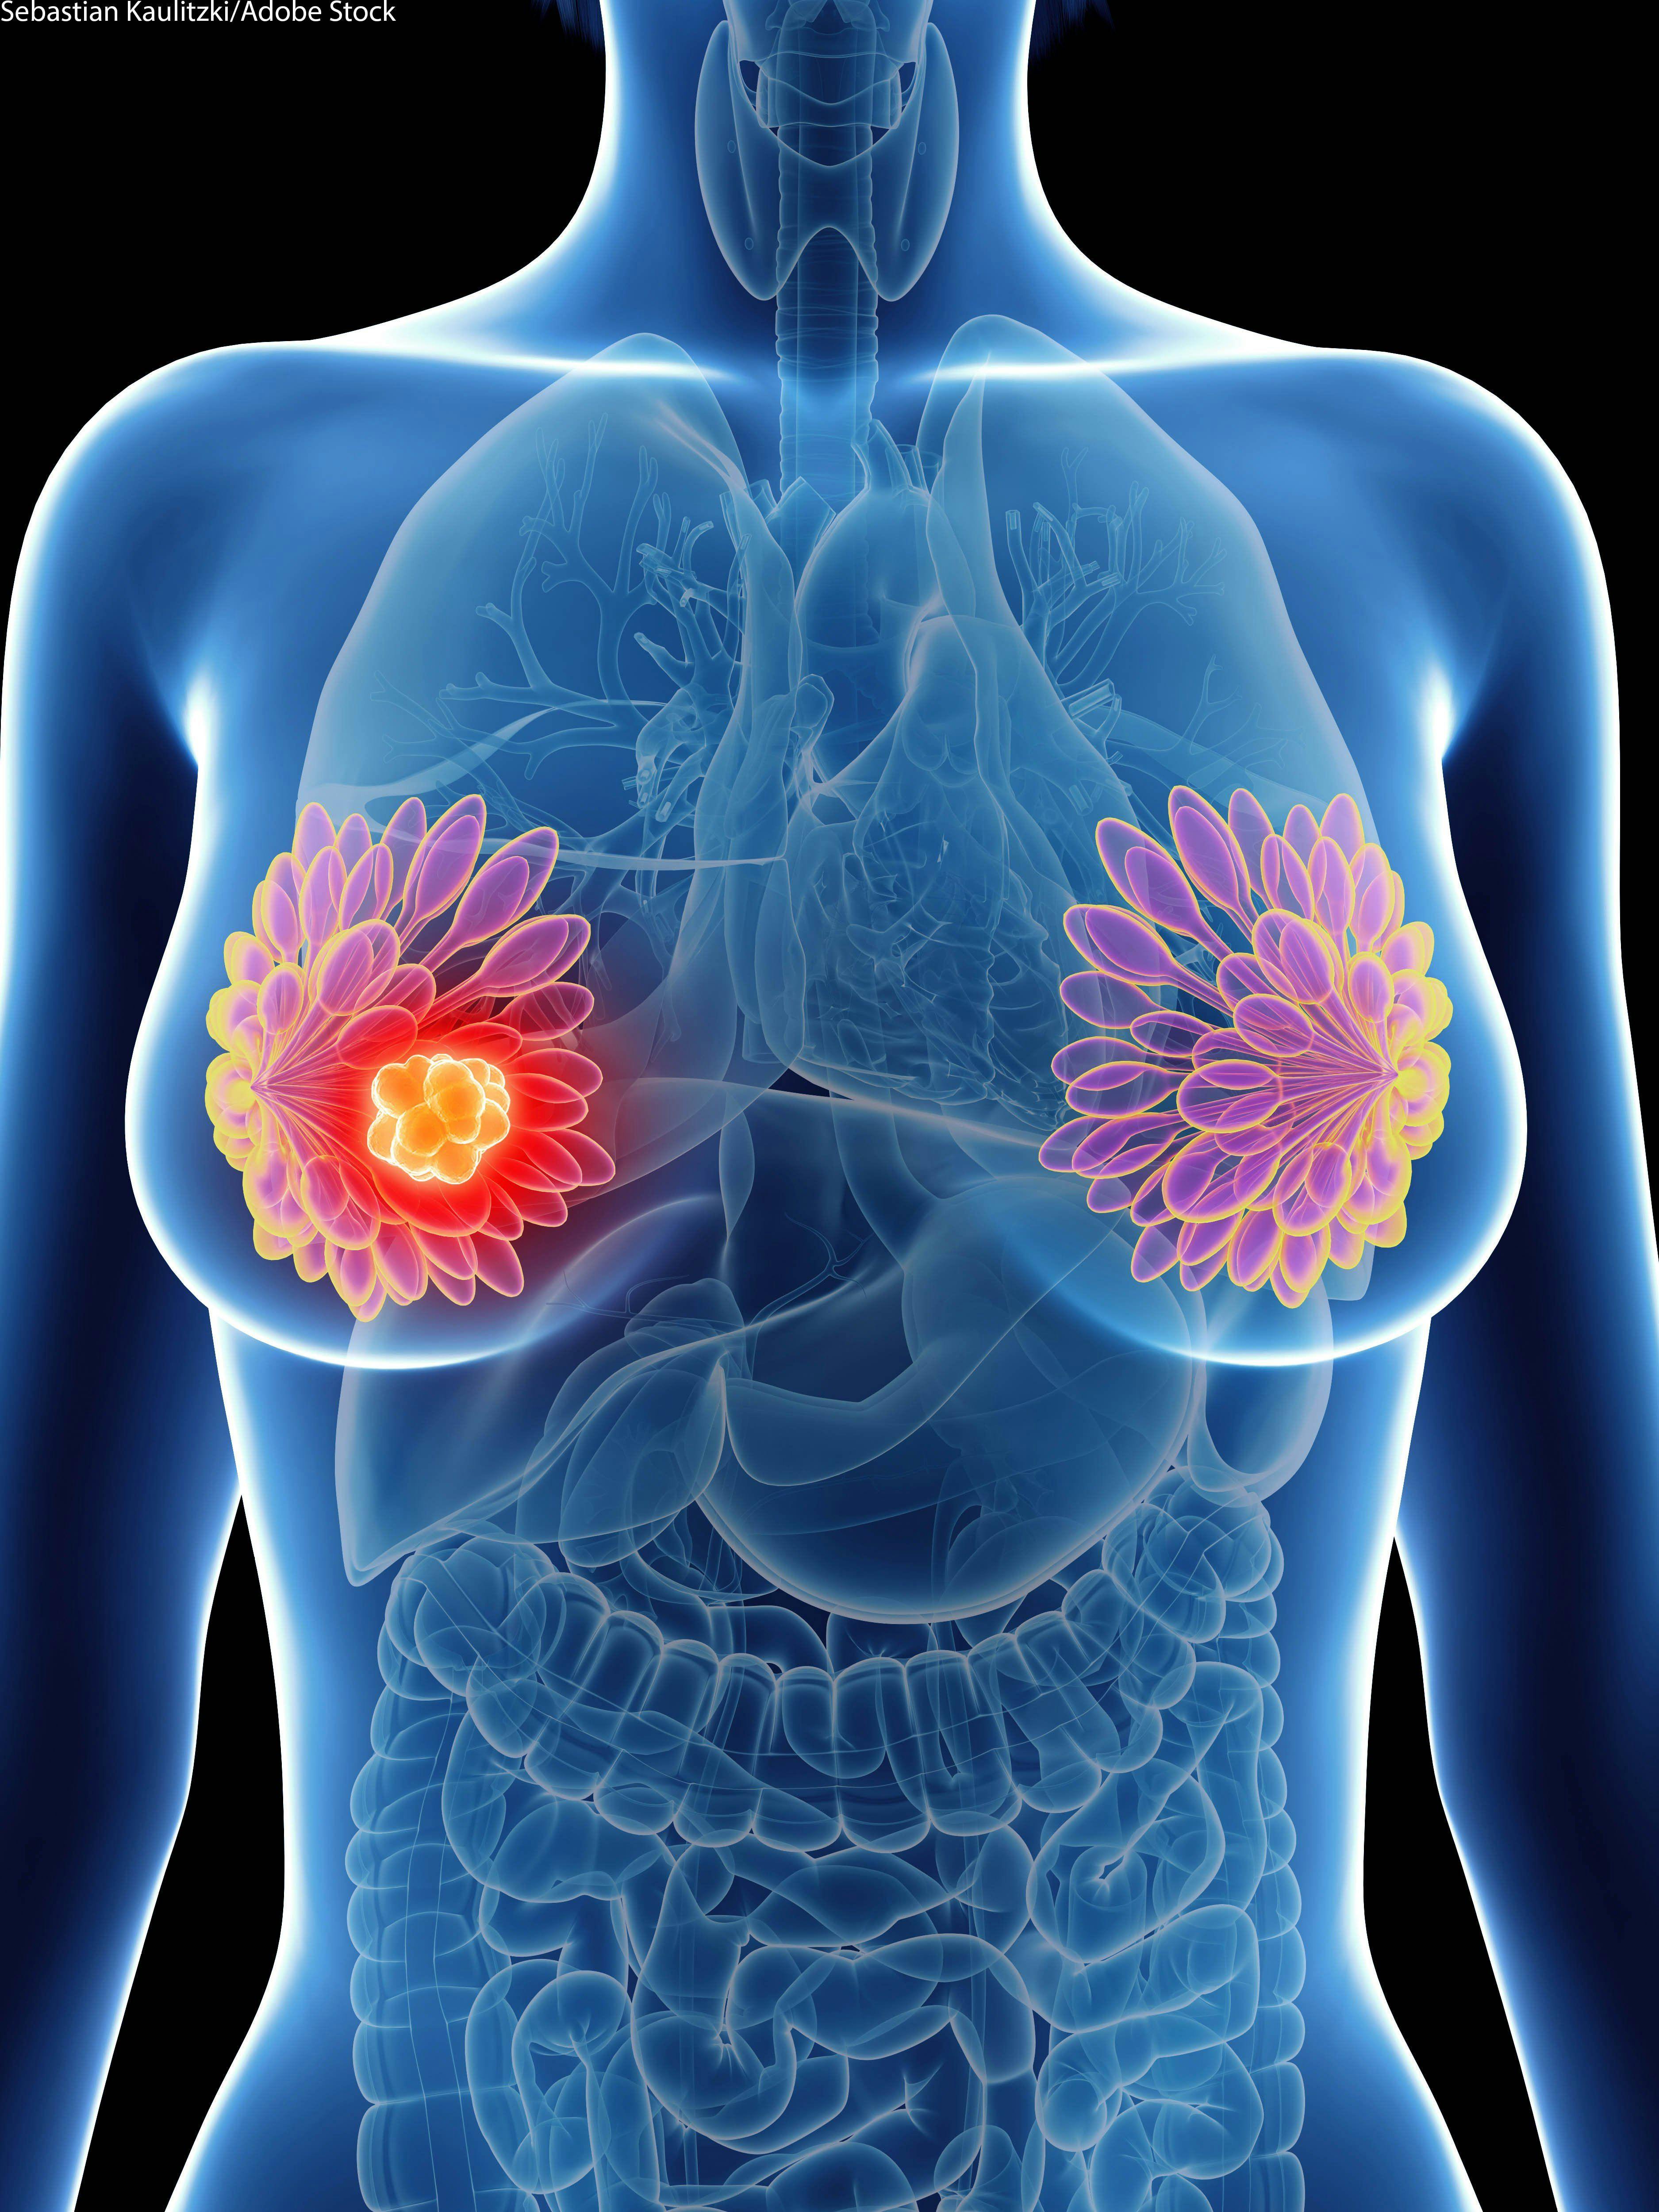 NAB-Paclitaxel Examined Against Solvent-Based Paclitaxel in Breast Cancer   